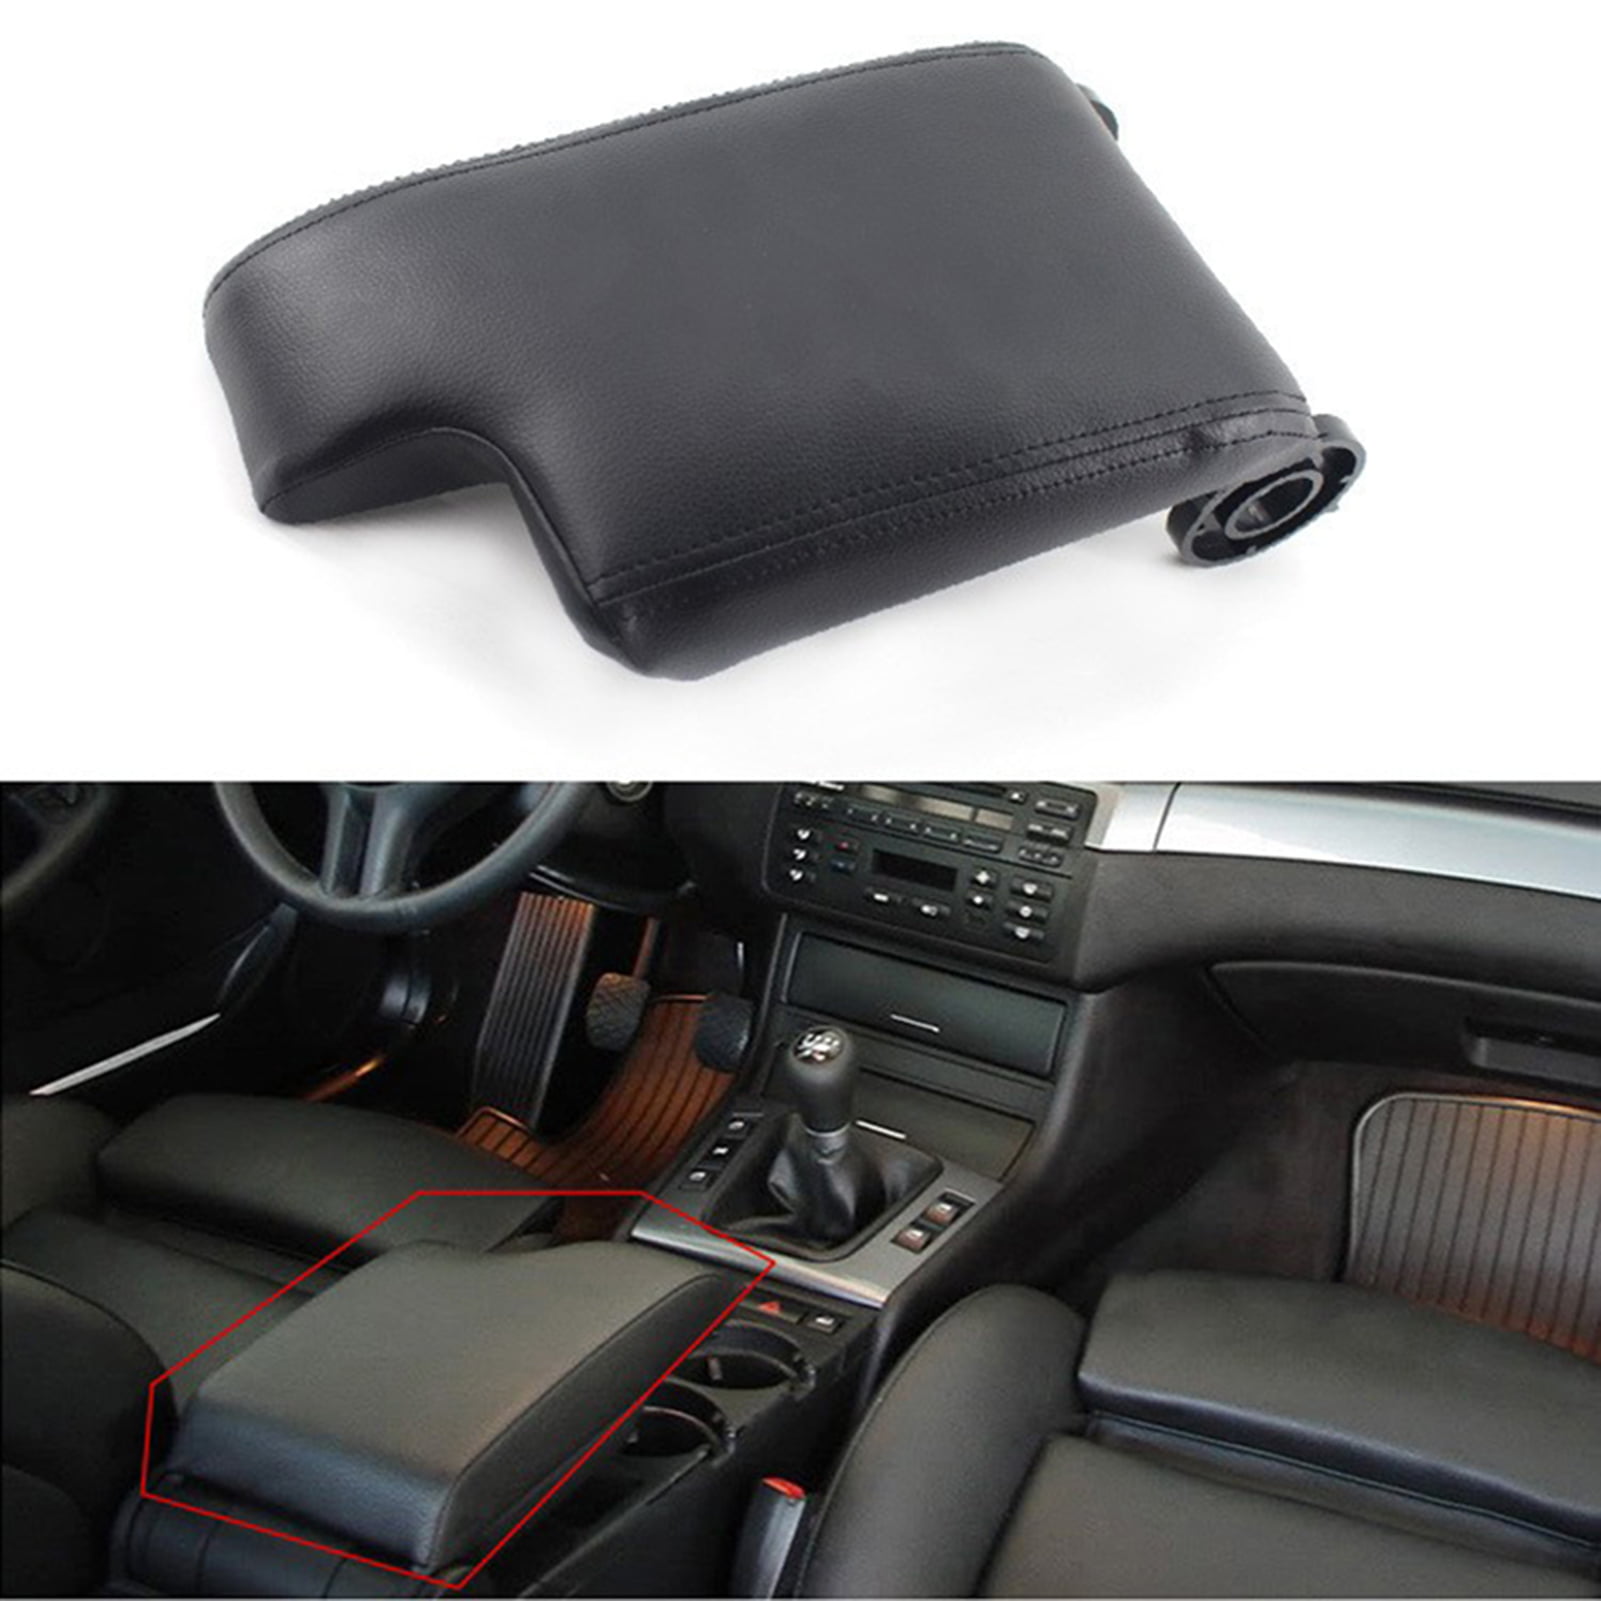 FITS BMW E46 ARM REST ARMREST BLACK COVER REAL LEATHER  NEW 